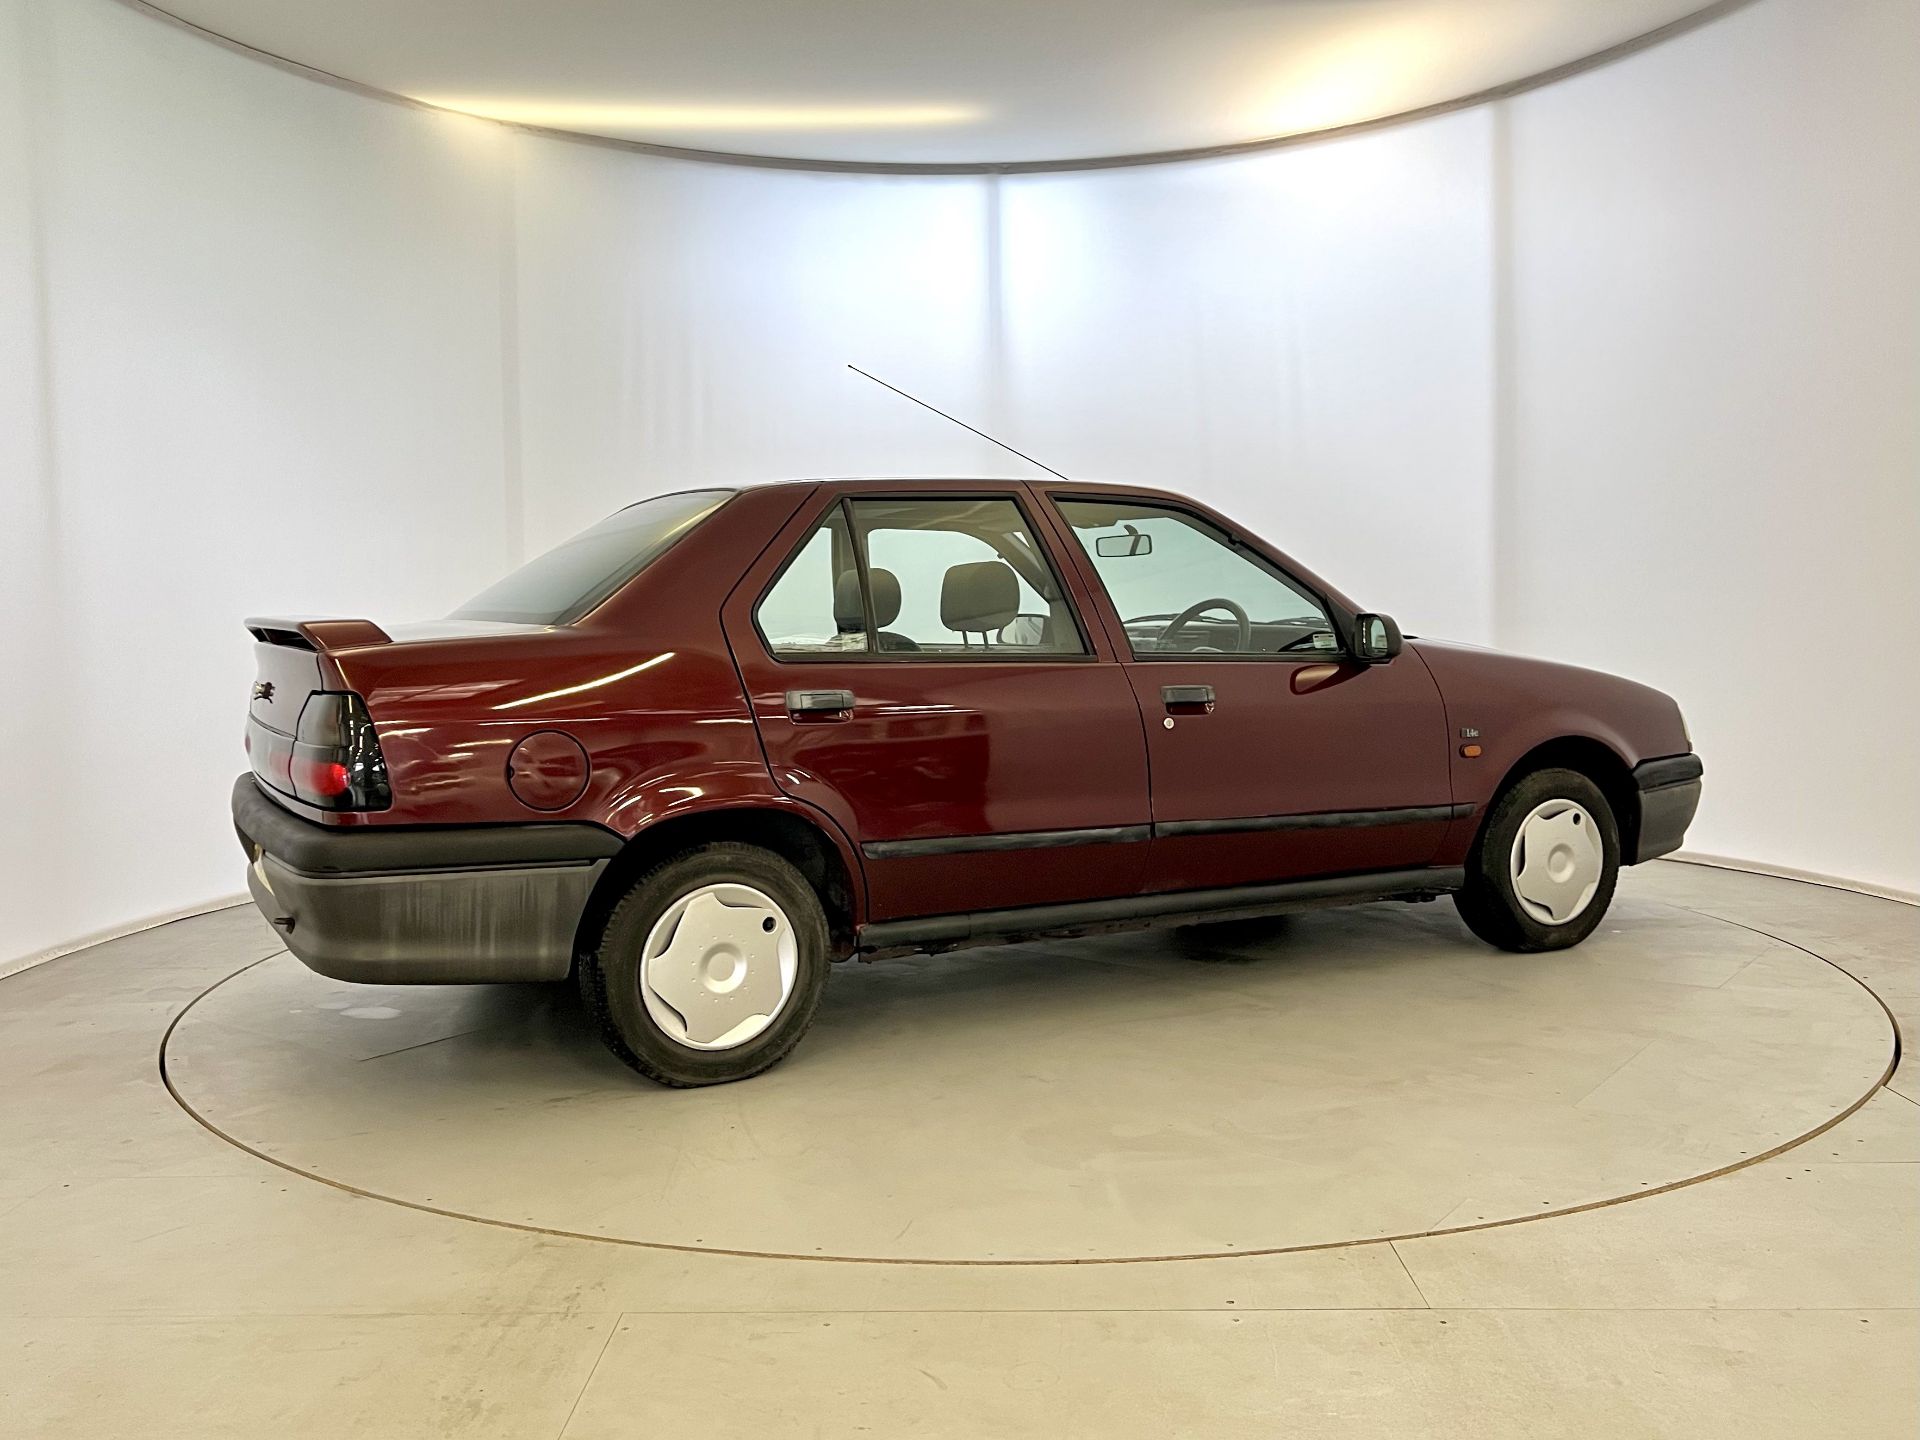 Renault 19 - Image 10 of 38